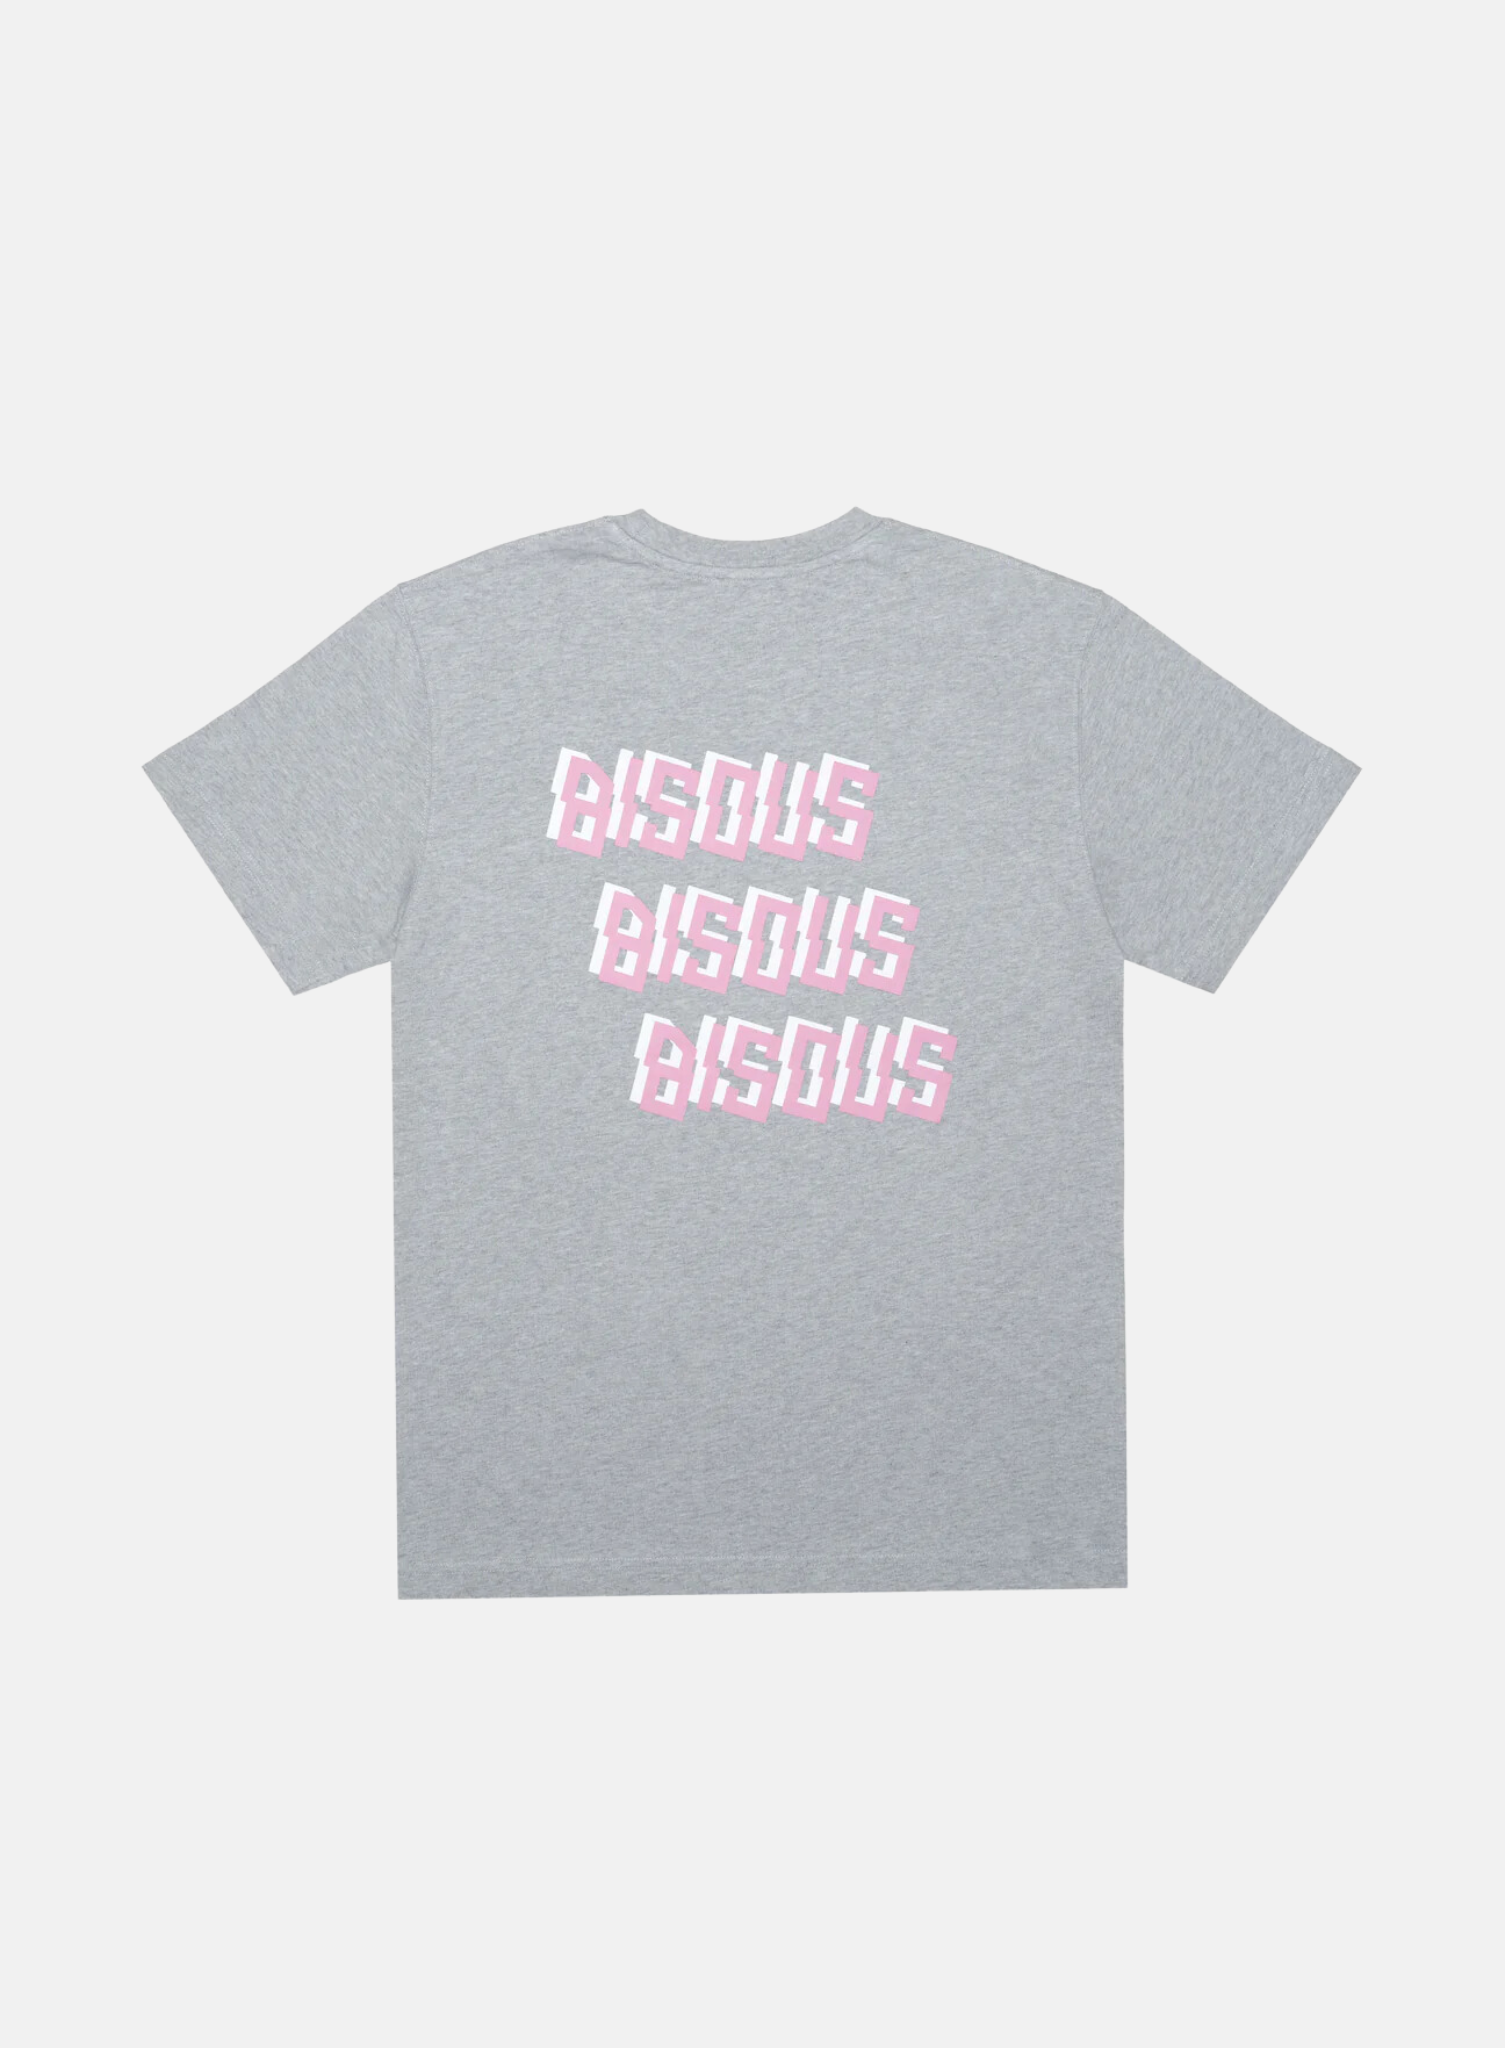 SS Bisous x3 Tee Ash Grey